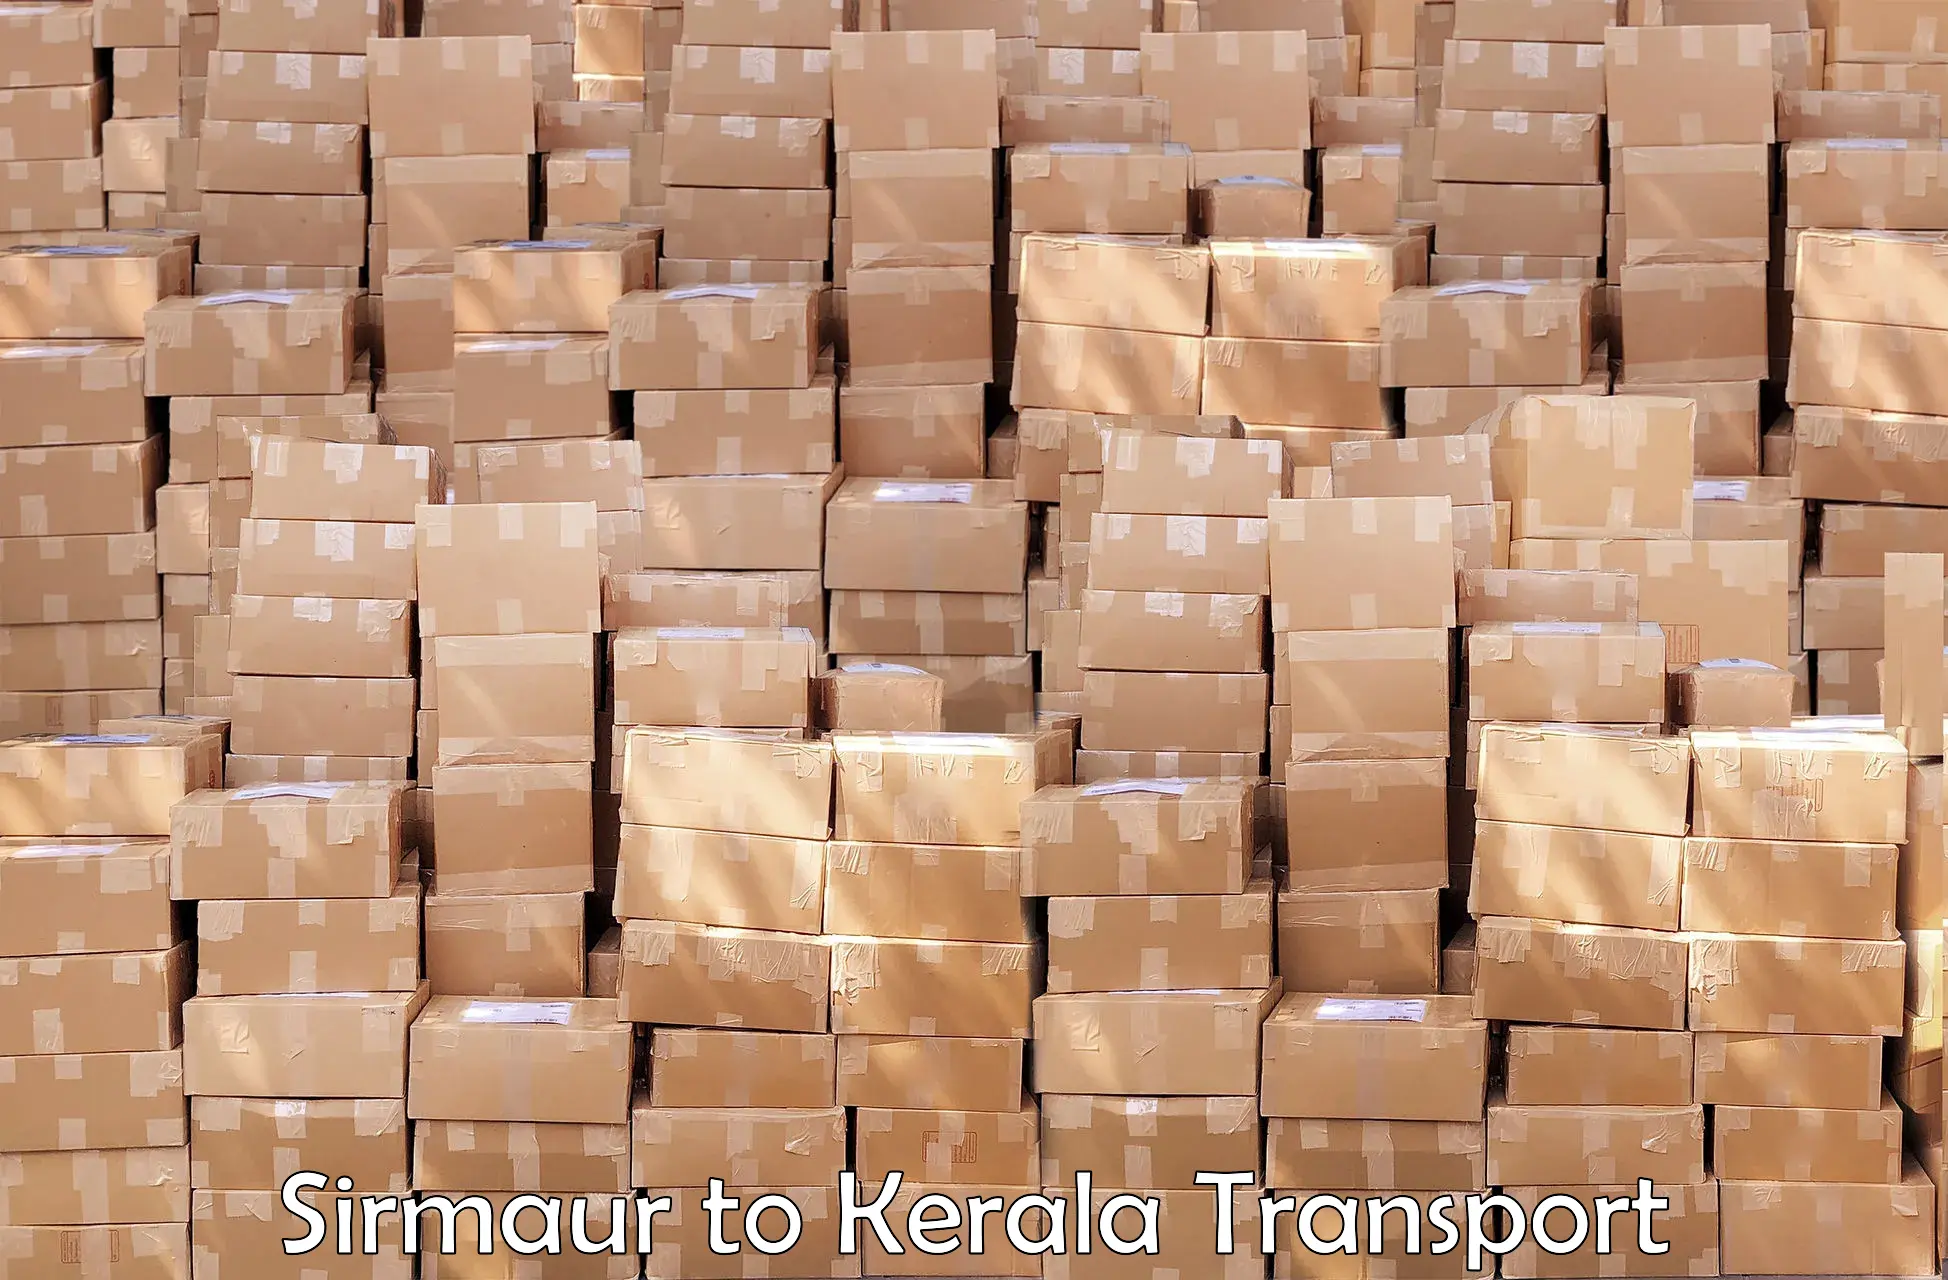 Commercial transport service Sirmaur to Calicut